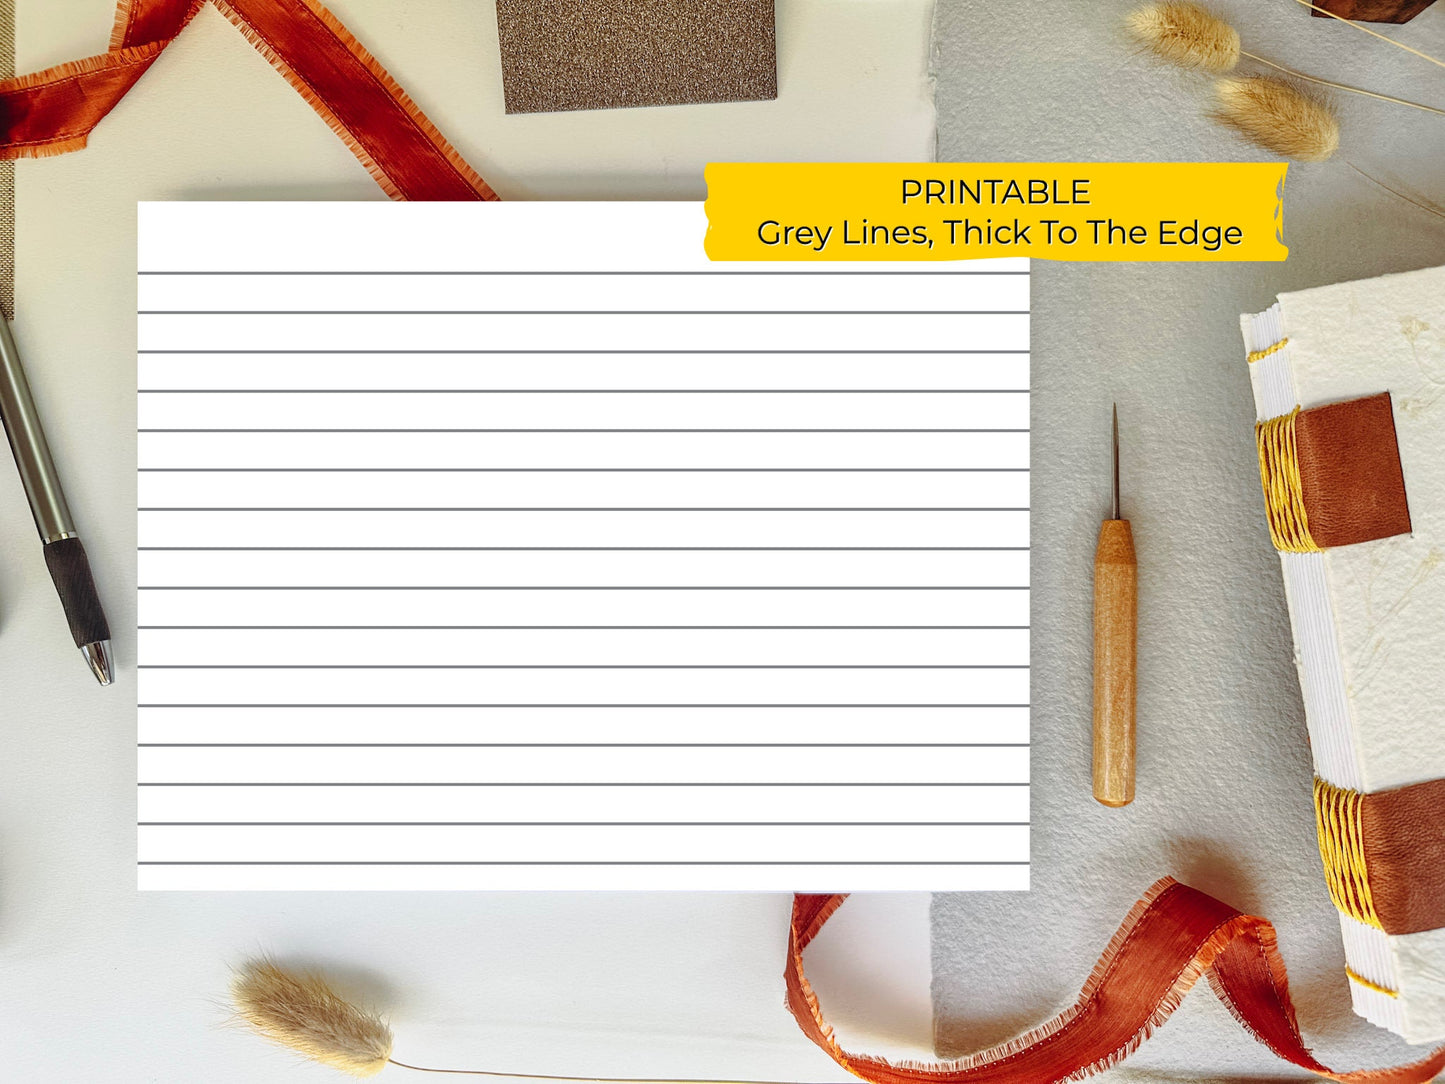 8.5 x 12 Thick To Edge LINED/RULED PRINTABLE Digital Book Binding Signature File - Grey Lines